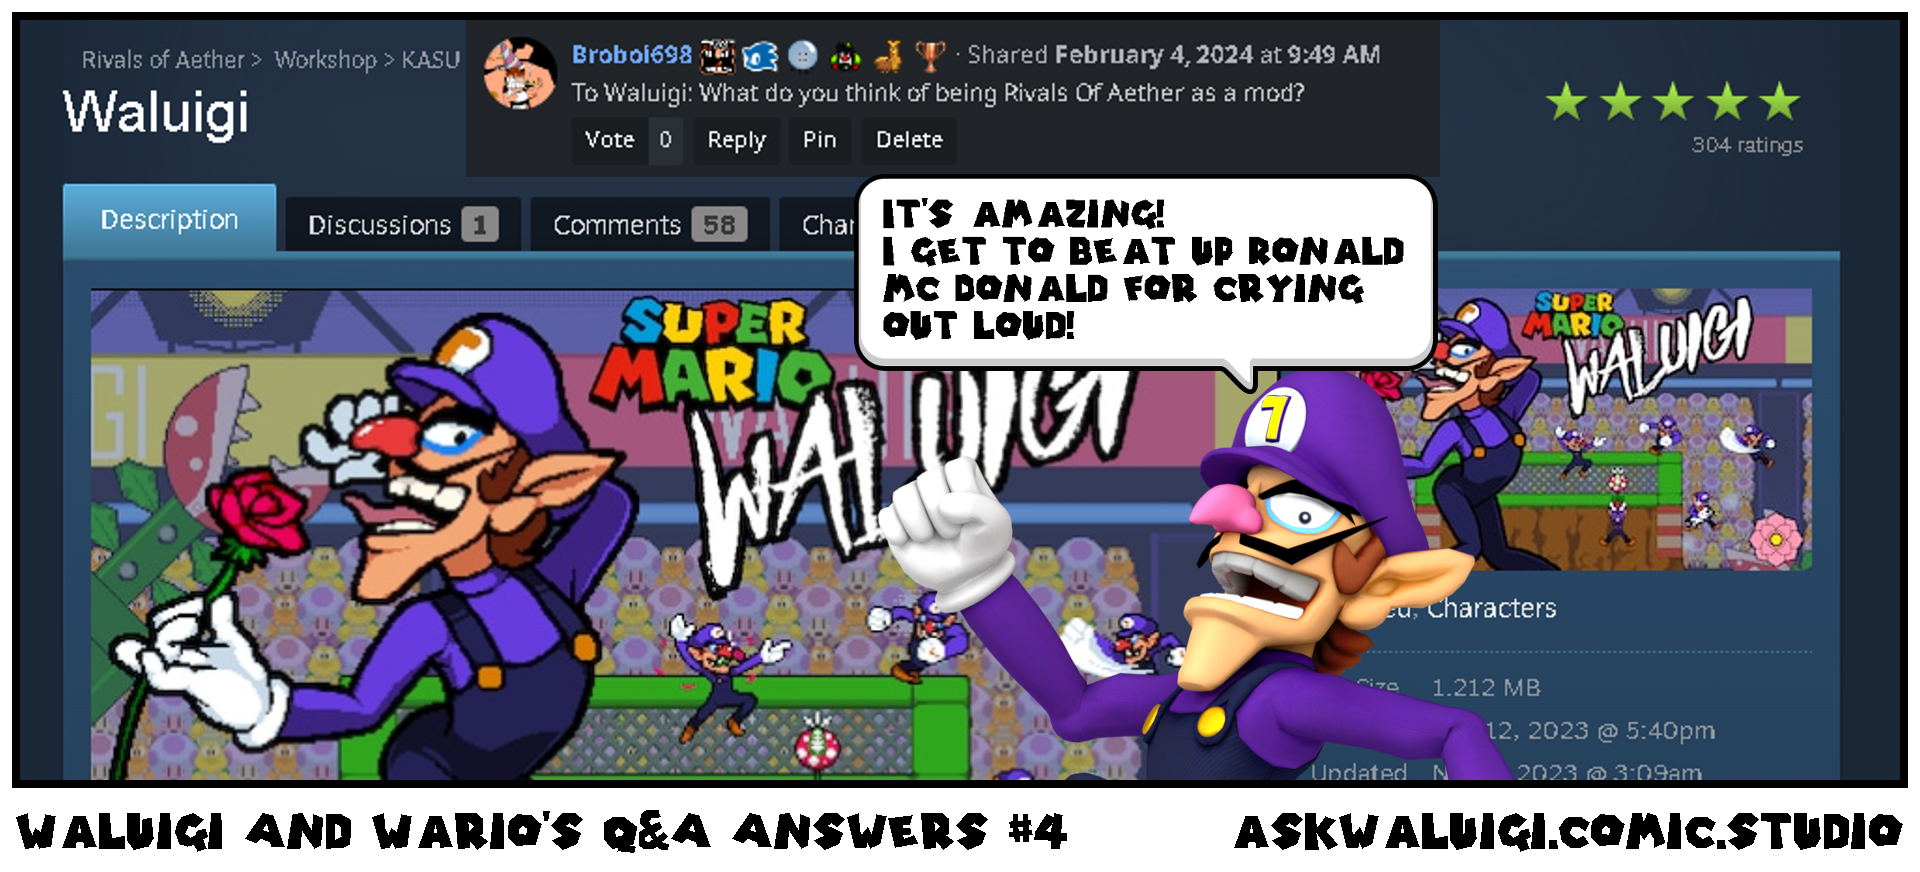 Waluigi And Wario's Q&A Answers #4